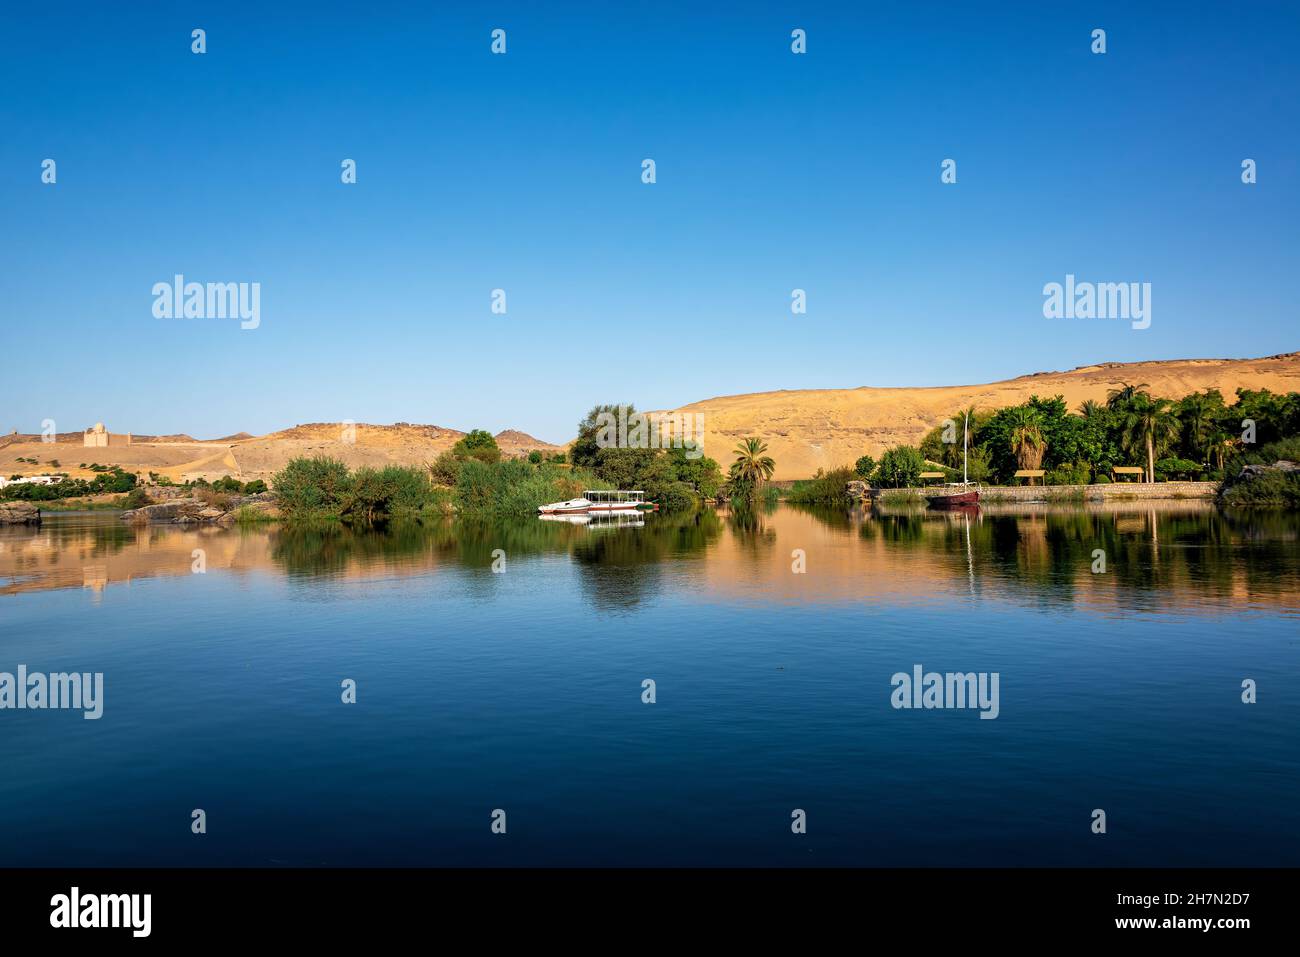 Sand dunes and palm trees reflected in the Nile River in Aswan, Egypt Stock Photo